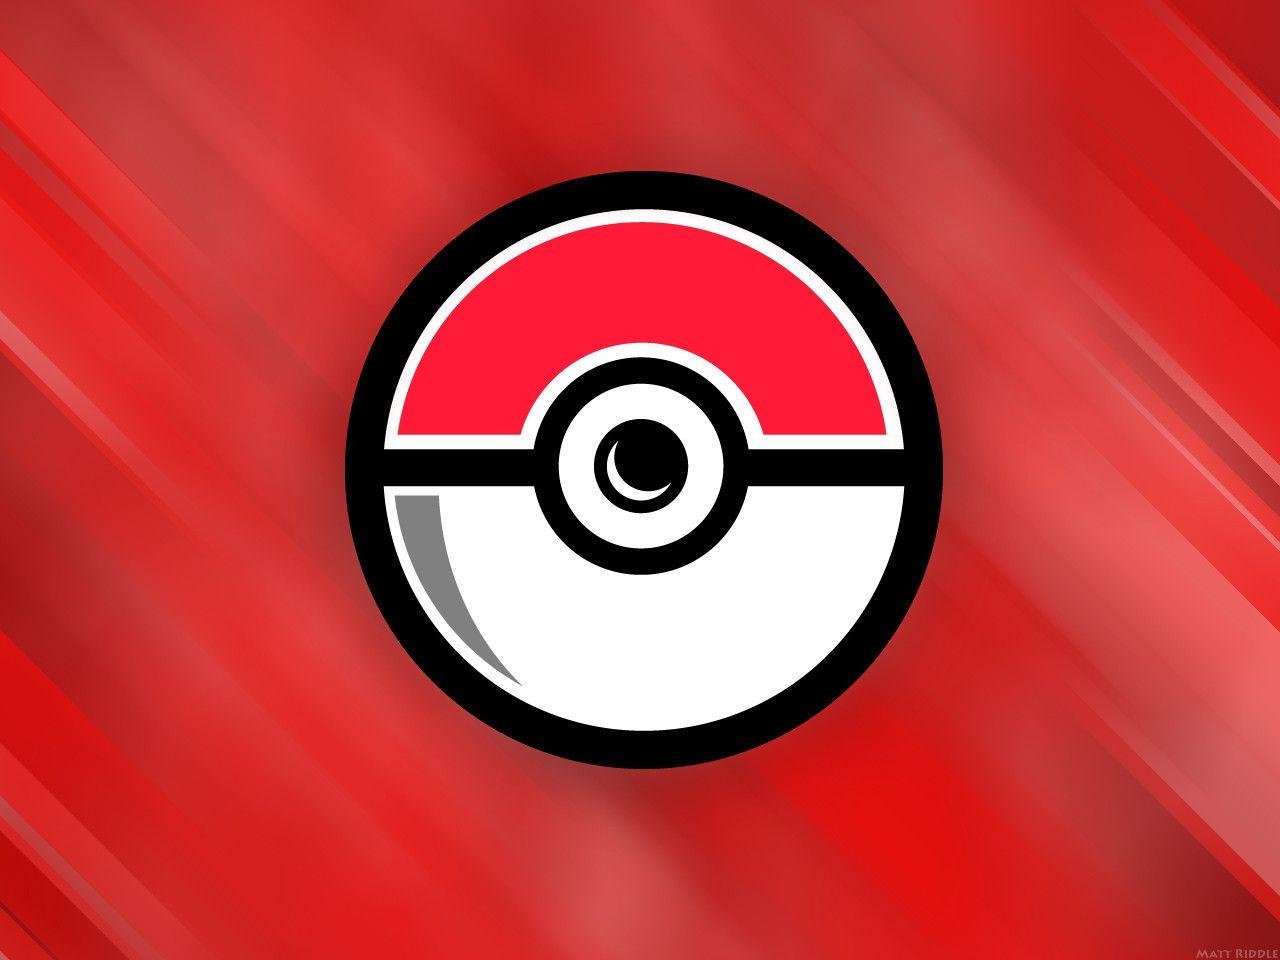 Pokeball Wallpapers 1280x960 by MattRiddle